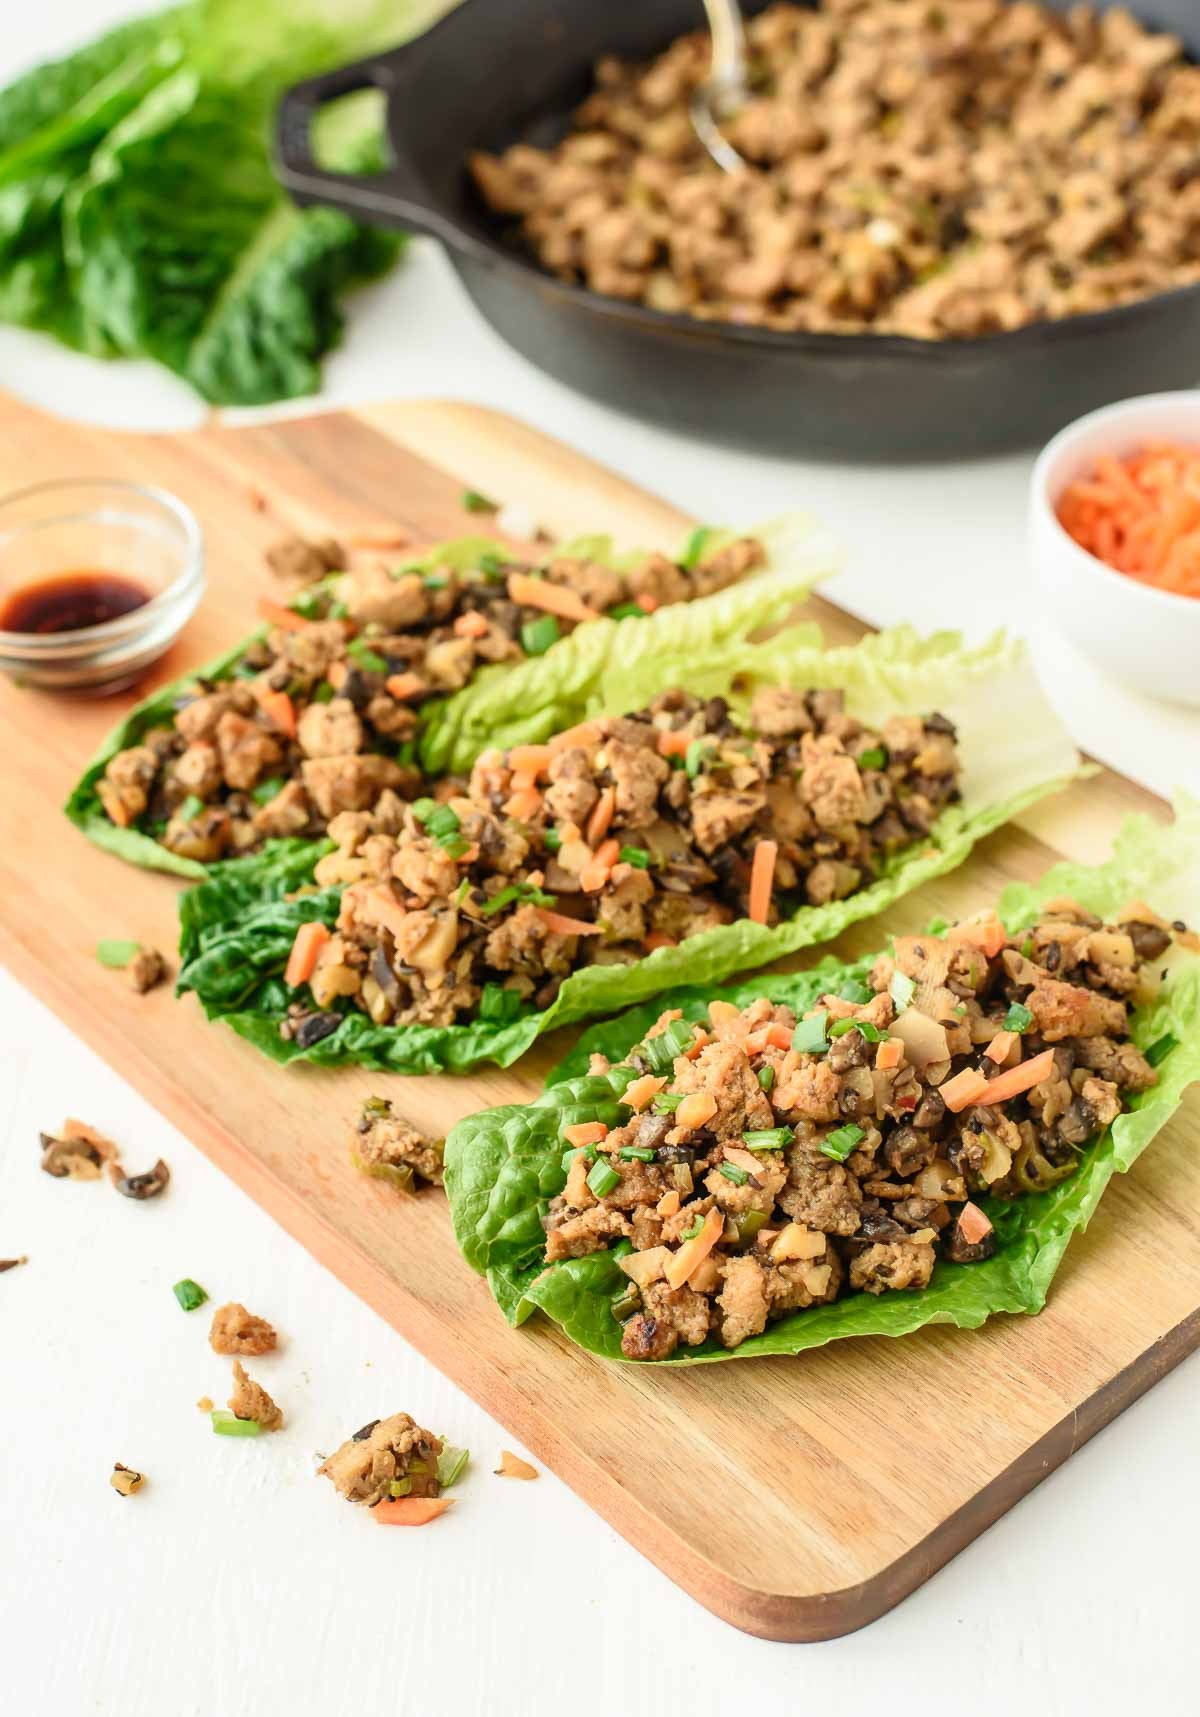 Vegetarian Lettuce WrapsReally nice recipes. Every hour.Show me what you cooked!